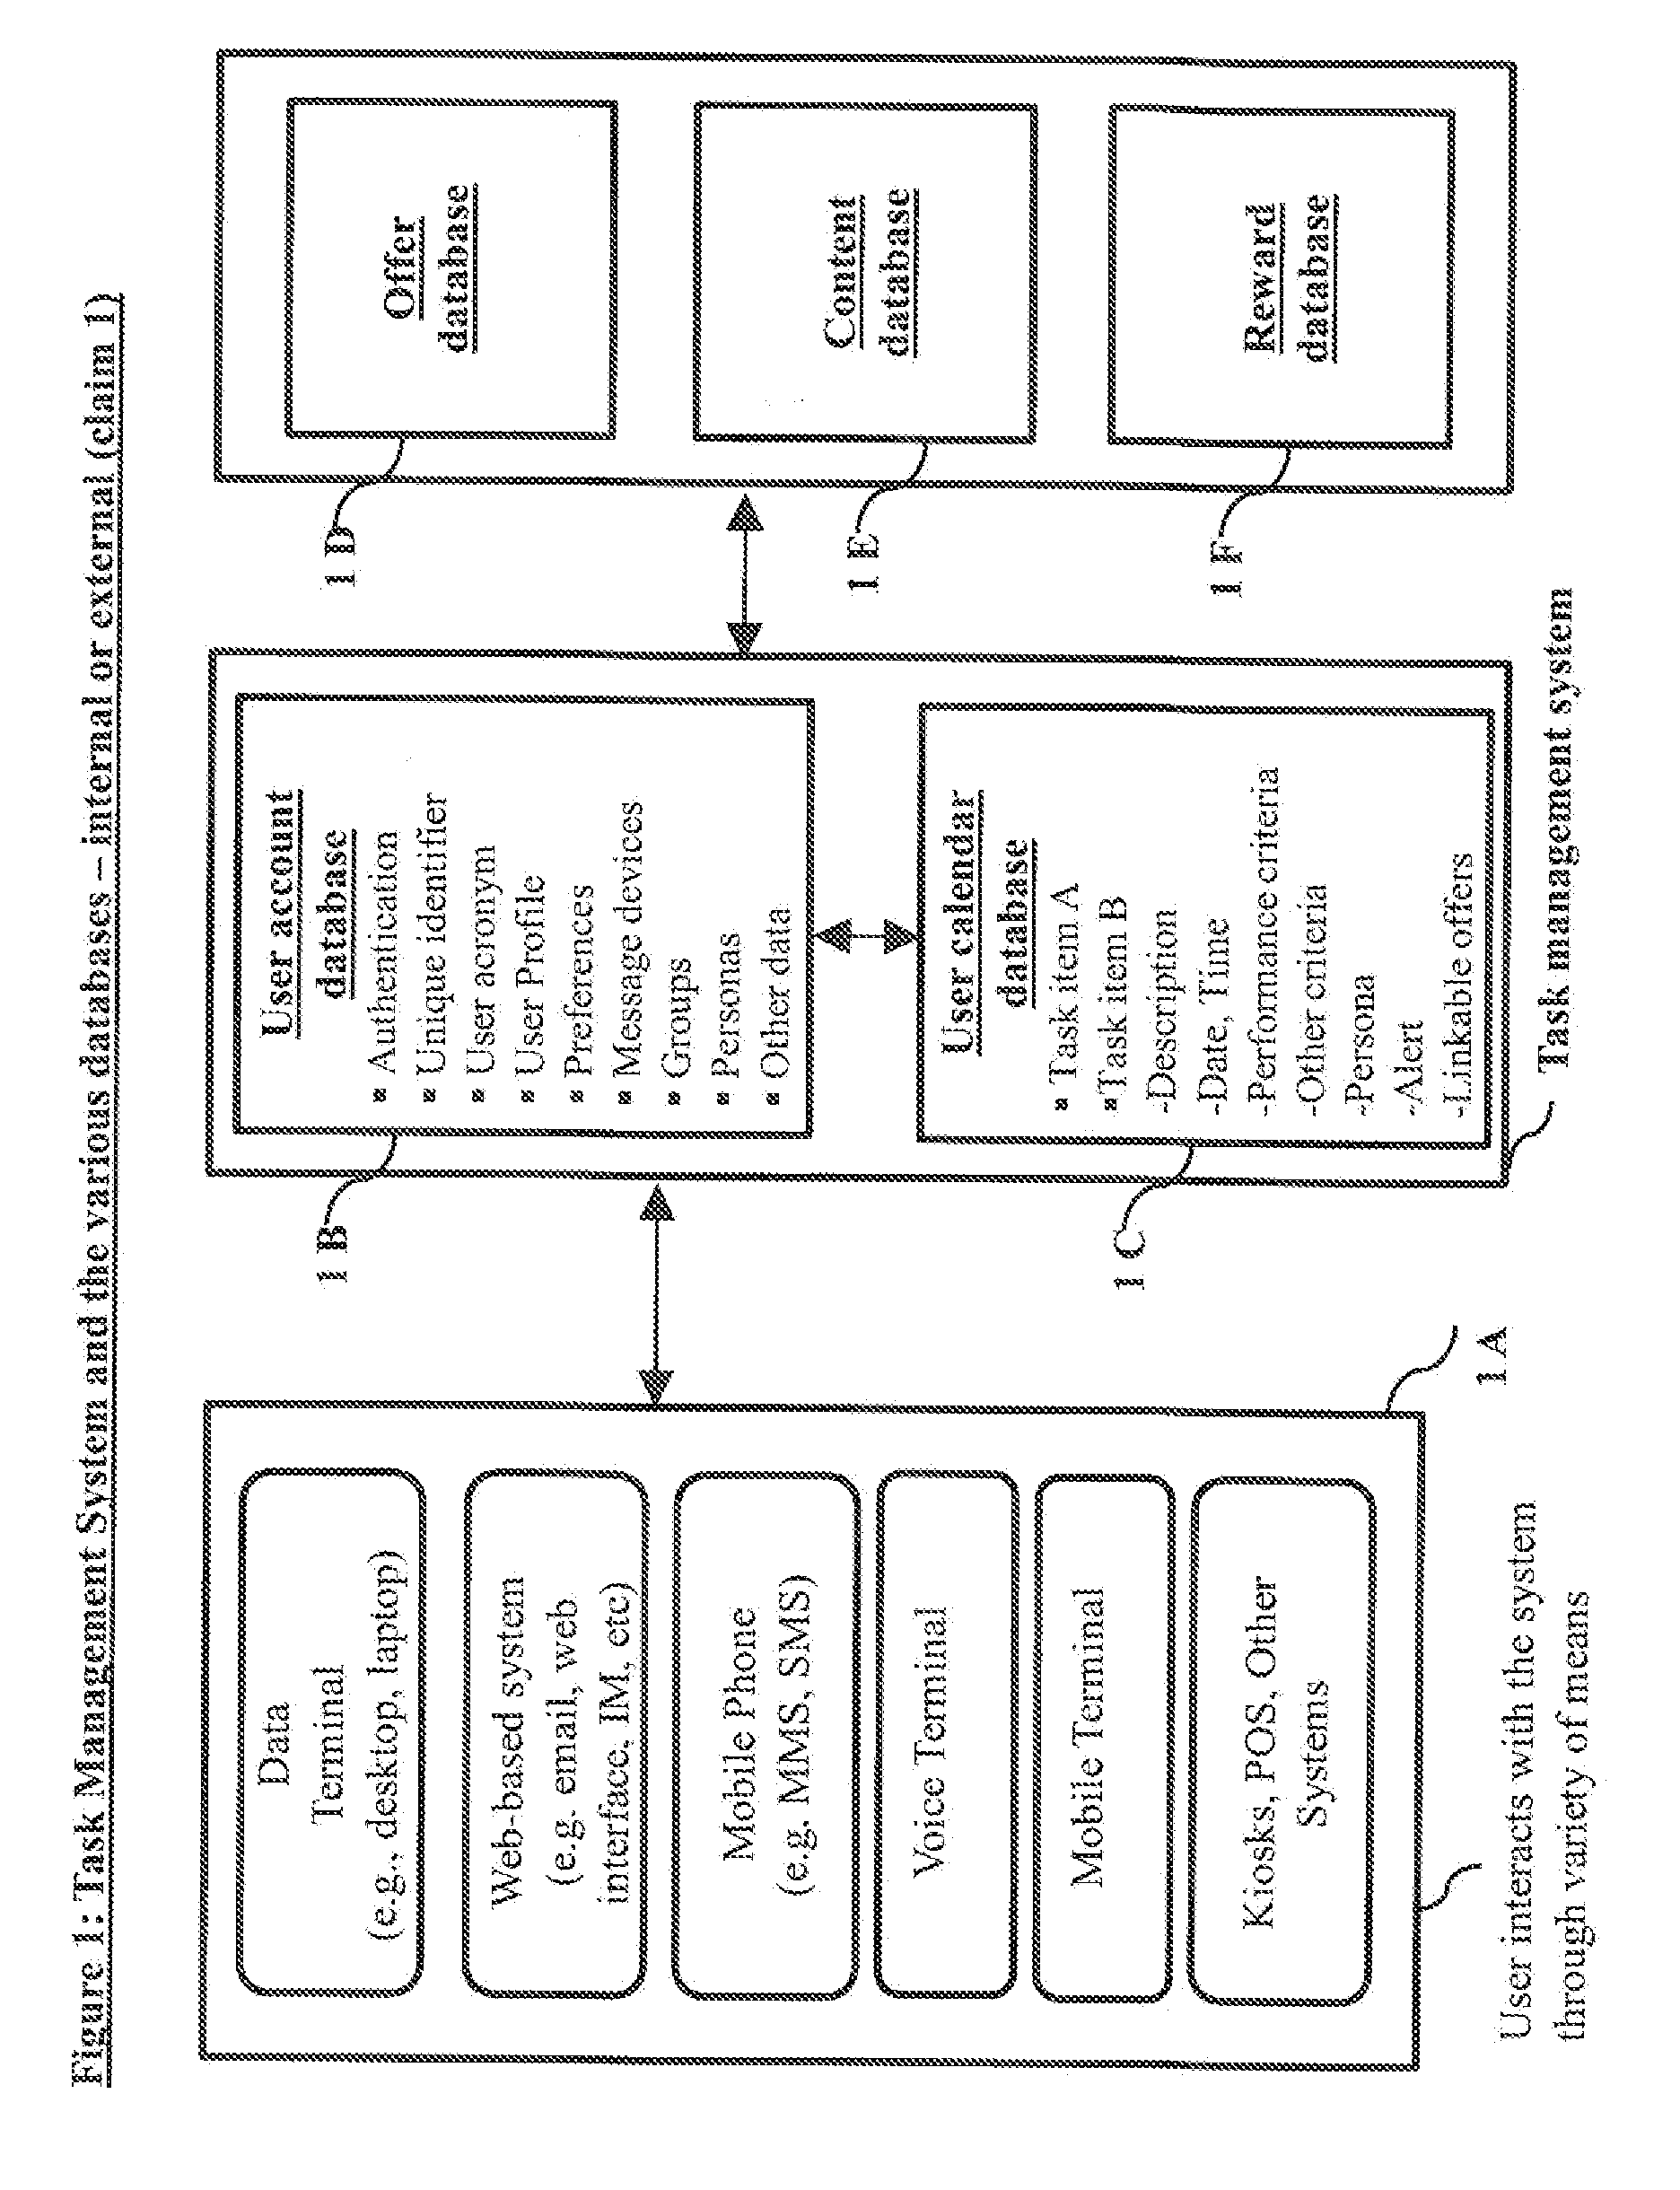 System and method for interactively connecting users and third party providers to individual or aggregated to-do list task items of users within the task management system